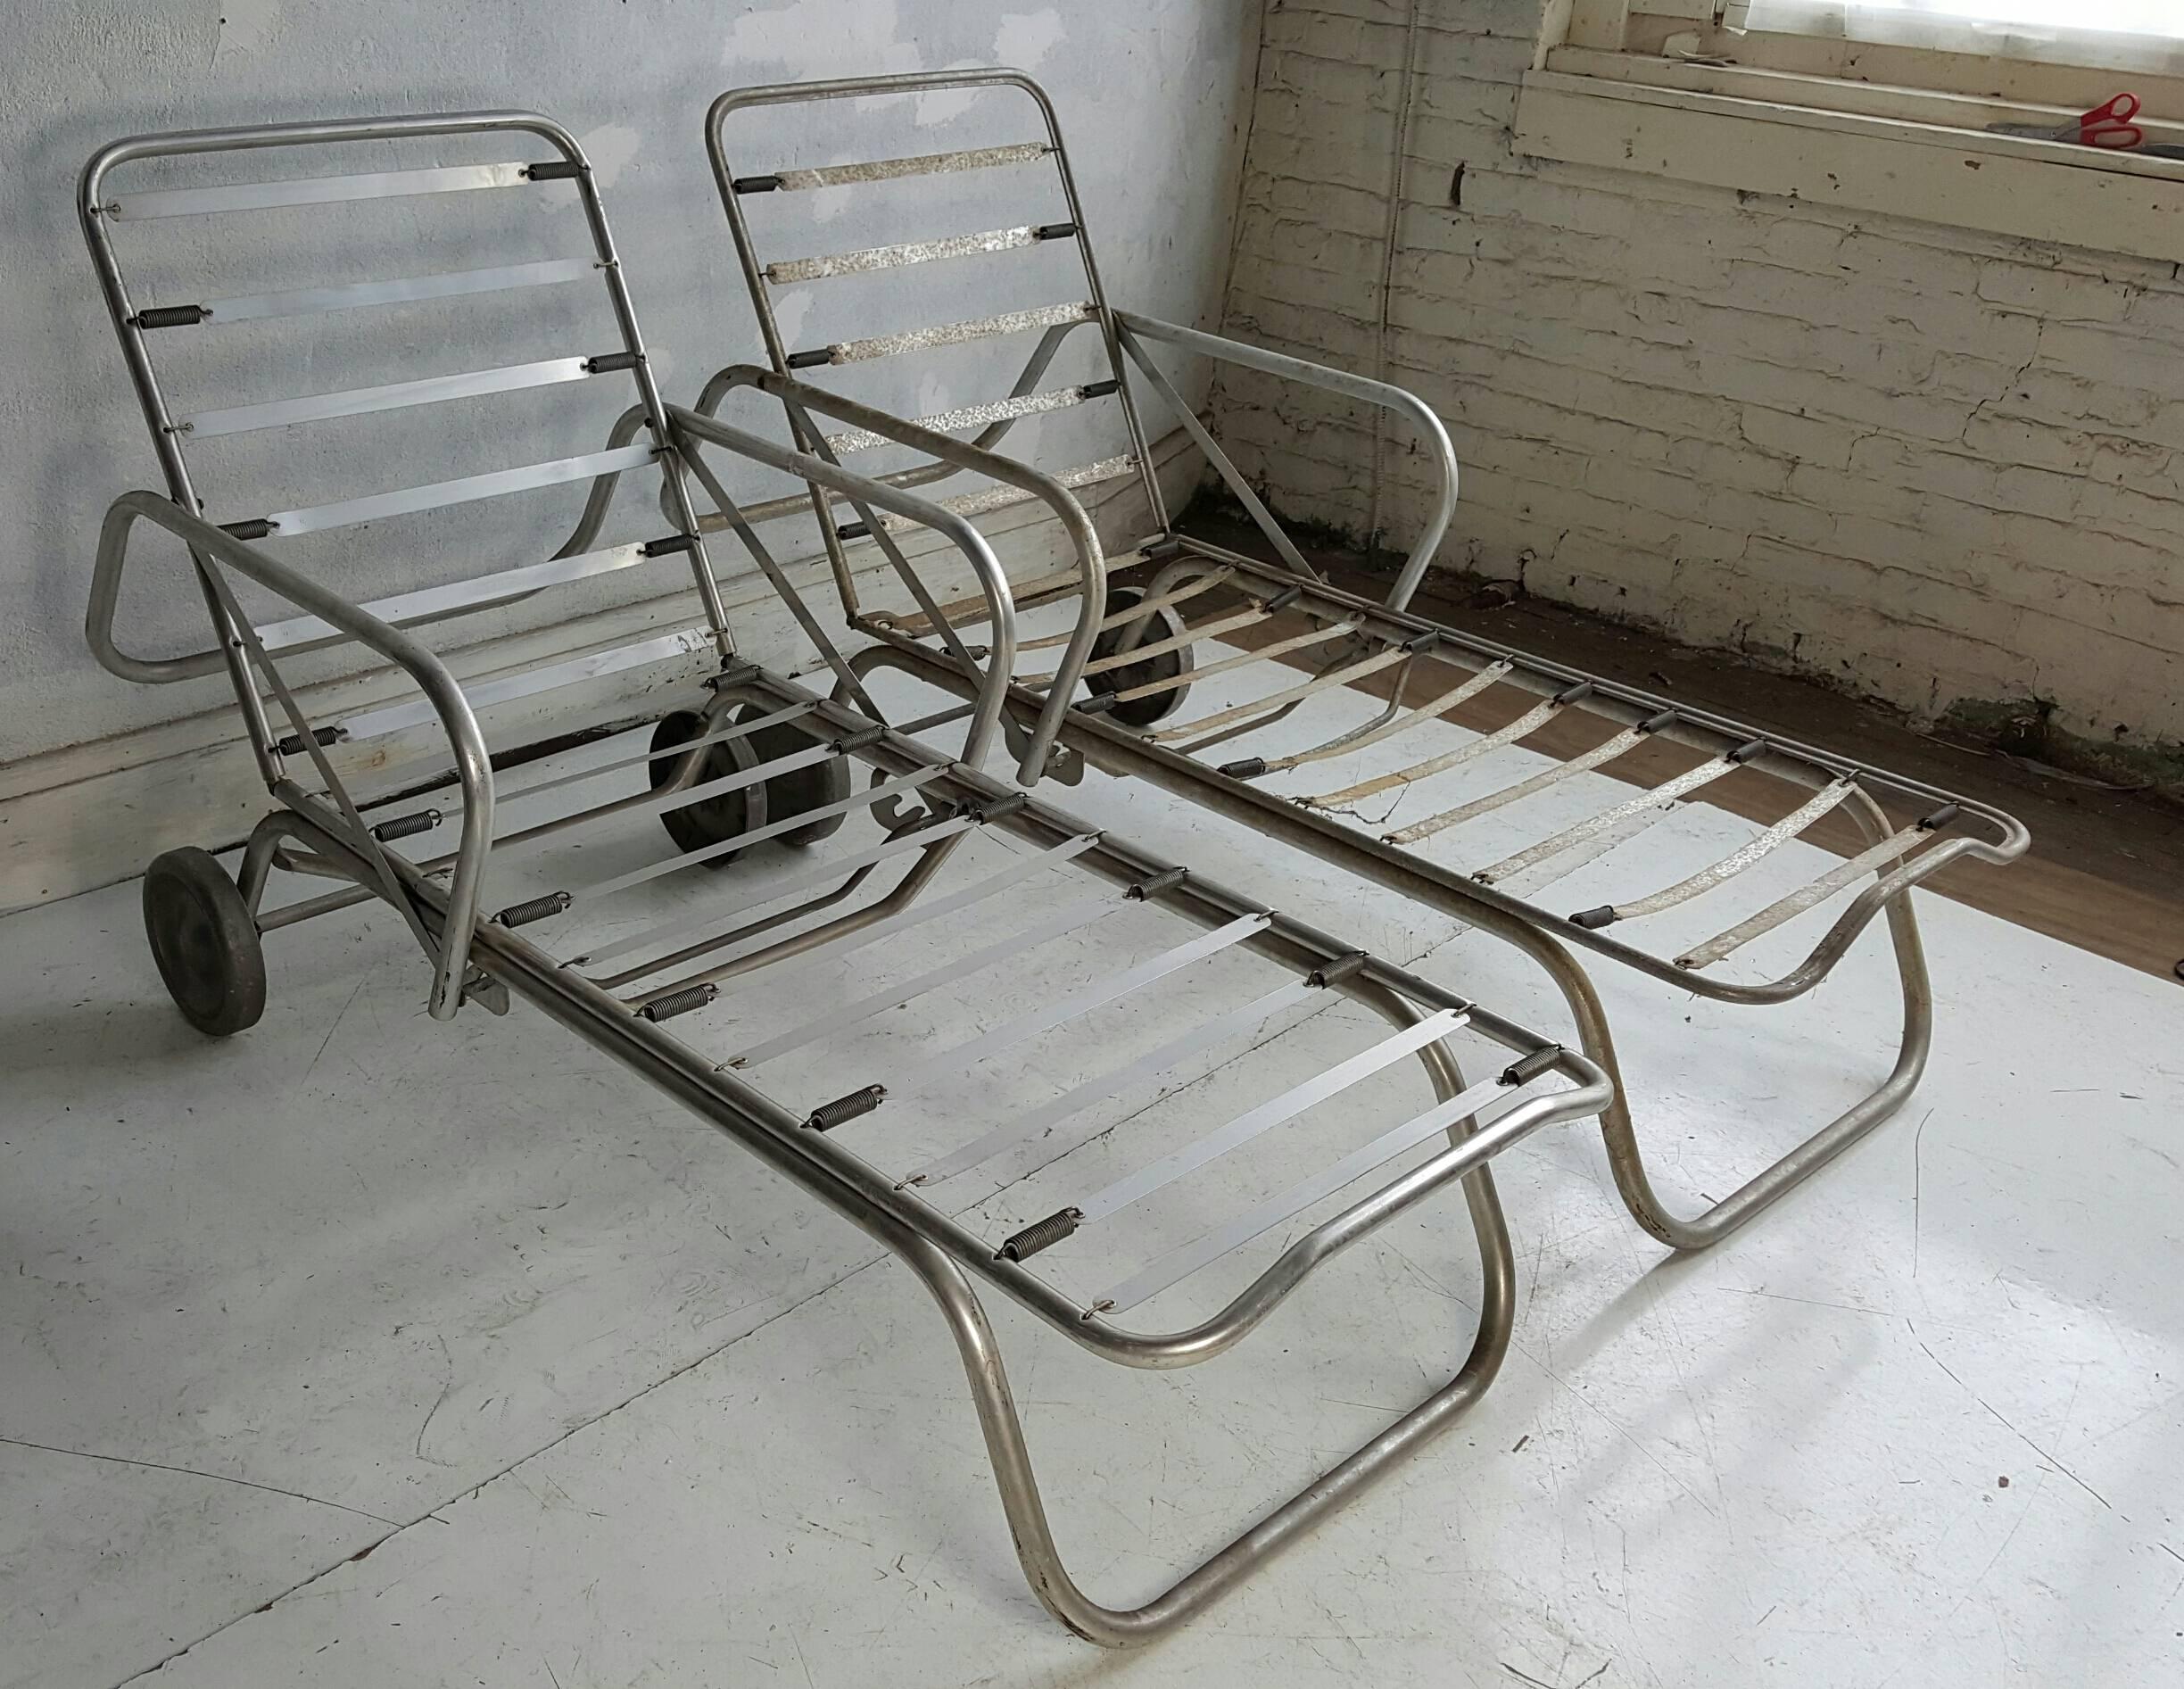 20th Century Pair of Machine Age or  Art Deco Aluminum Chaise Lounges for Outdoor Patio